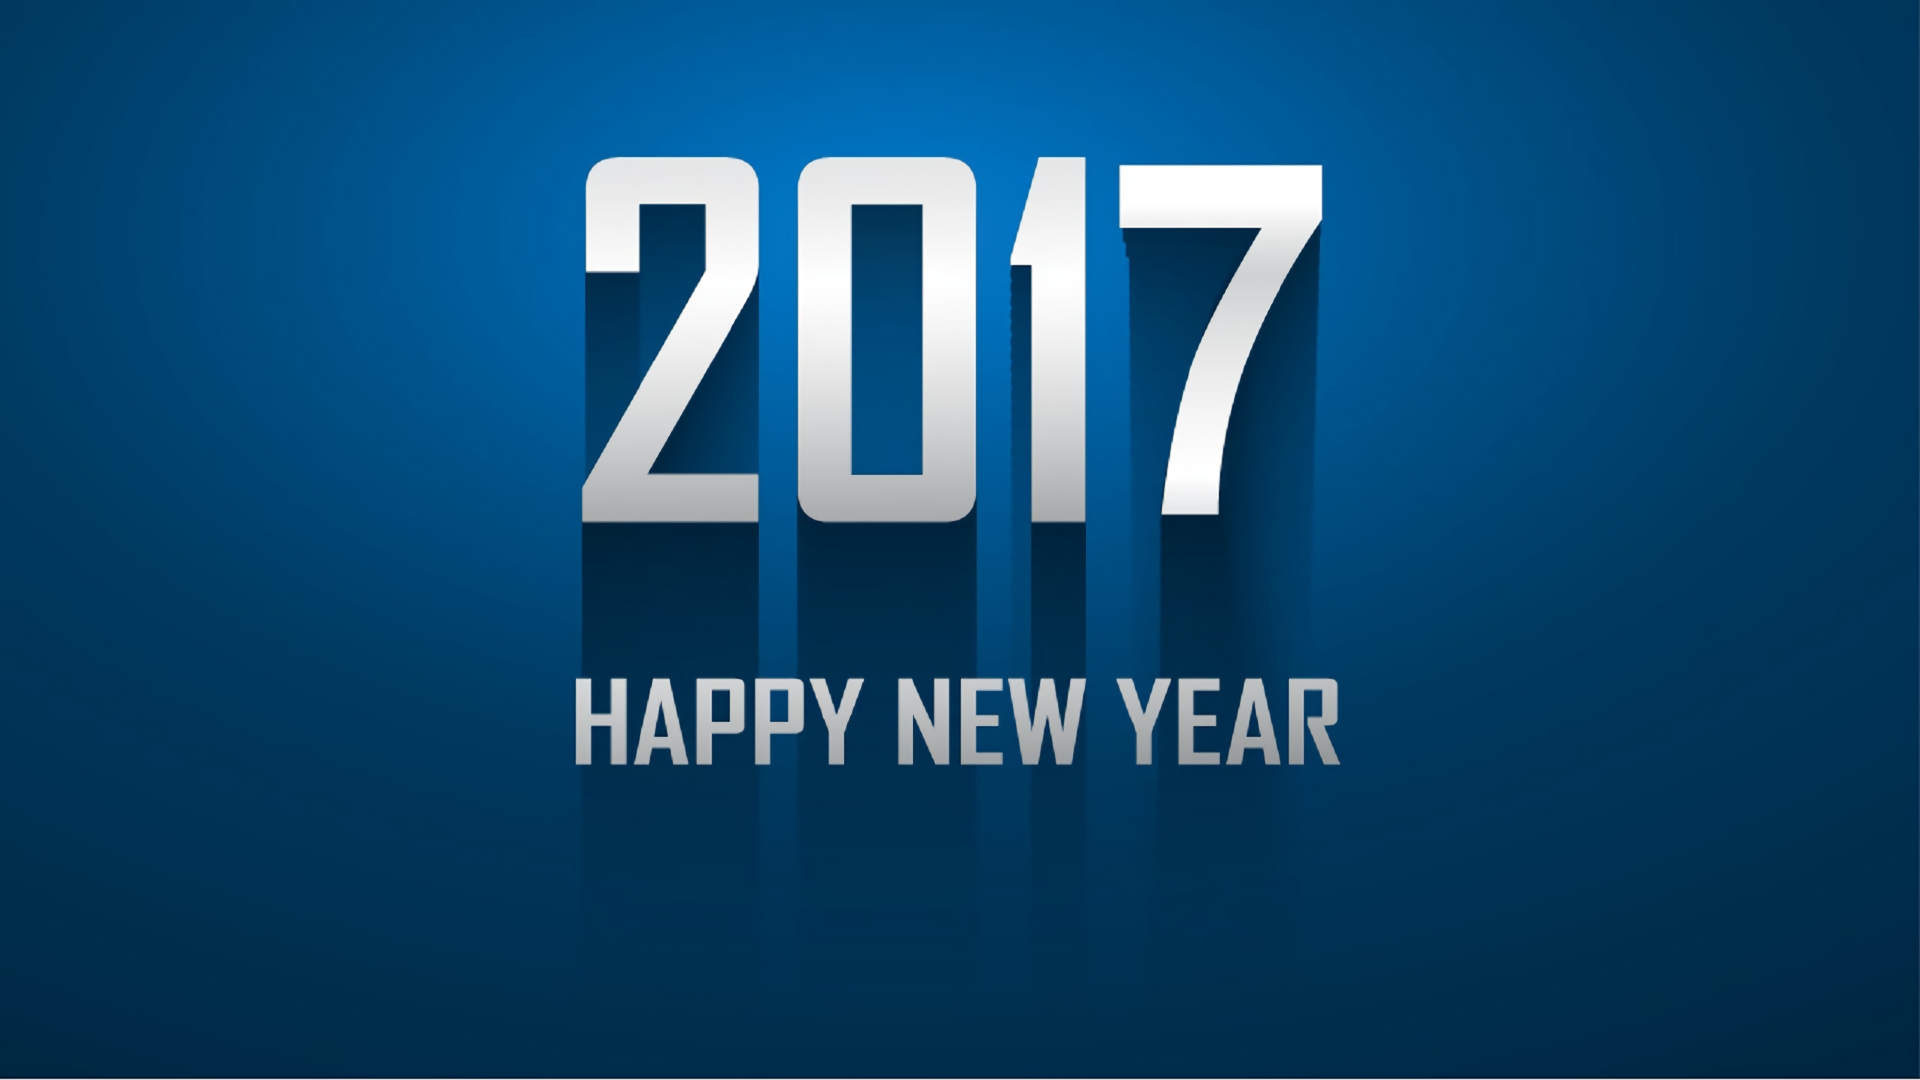 New Year New Year 2017 Blue 1920x1080